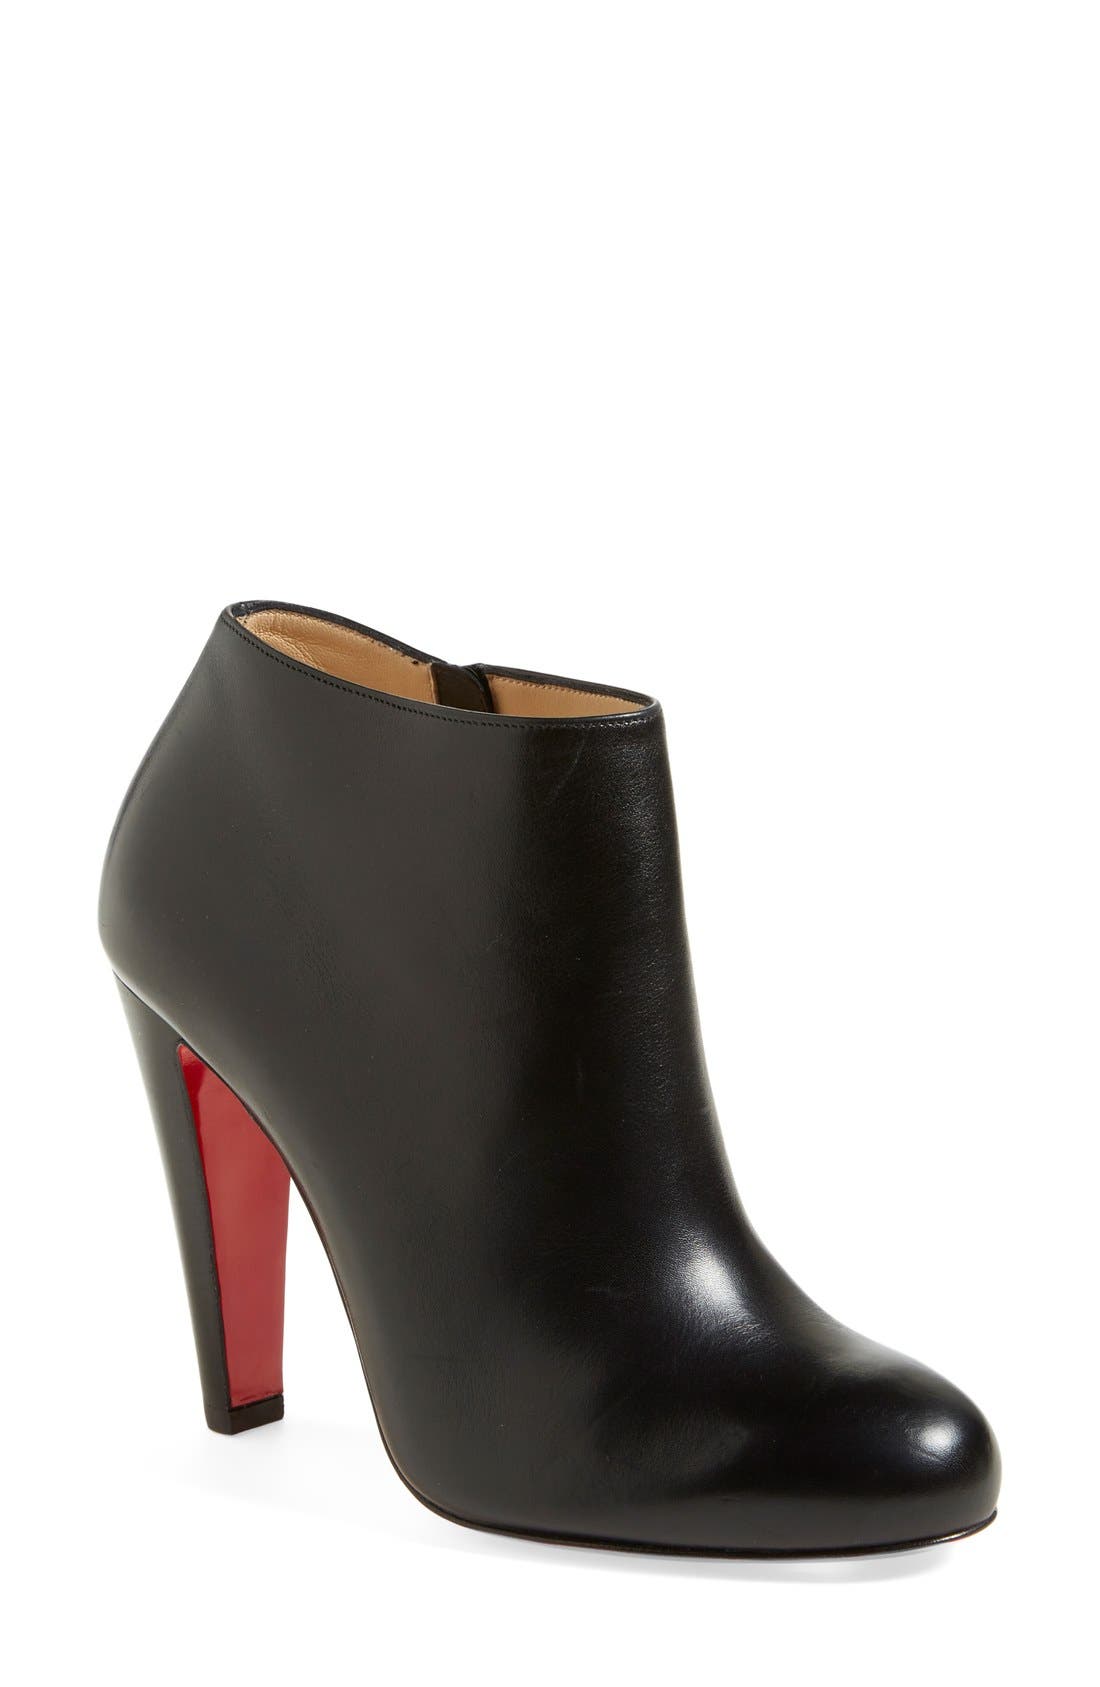 christian louboutin boots nordstrom